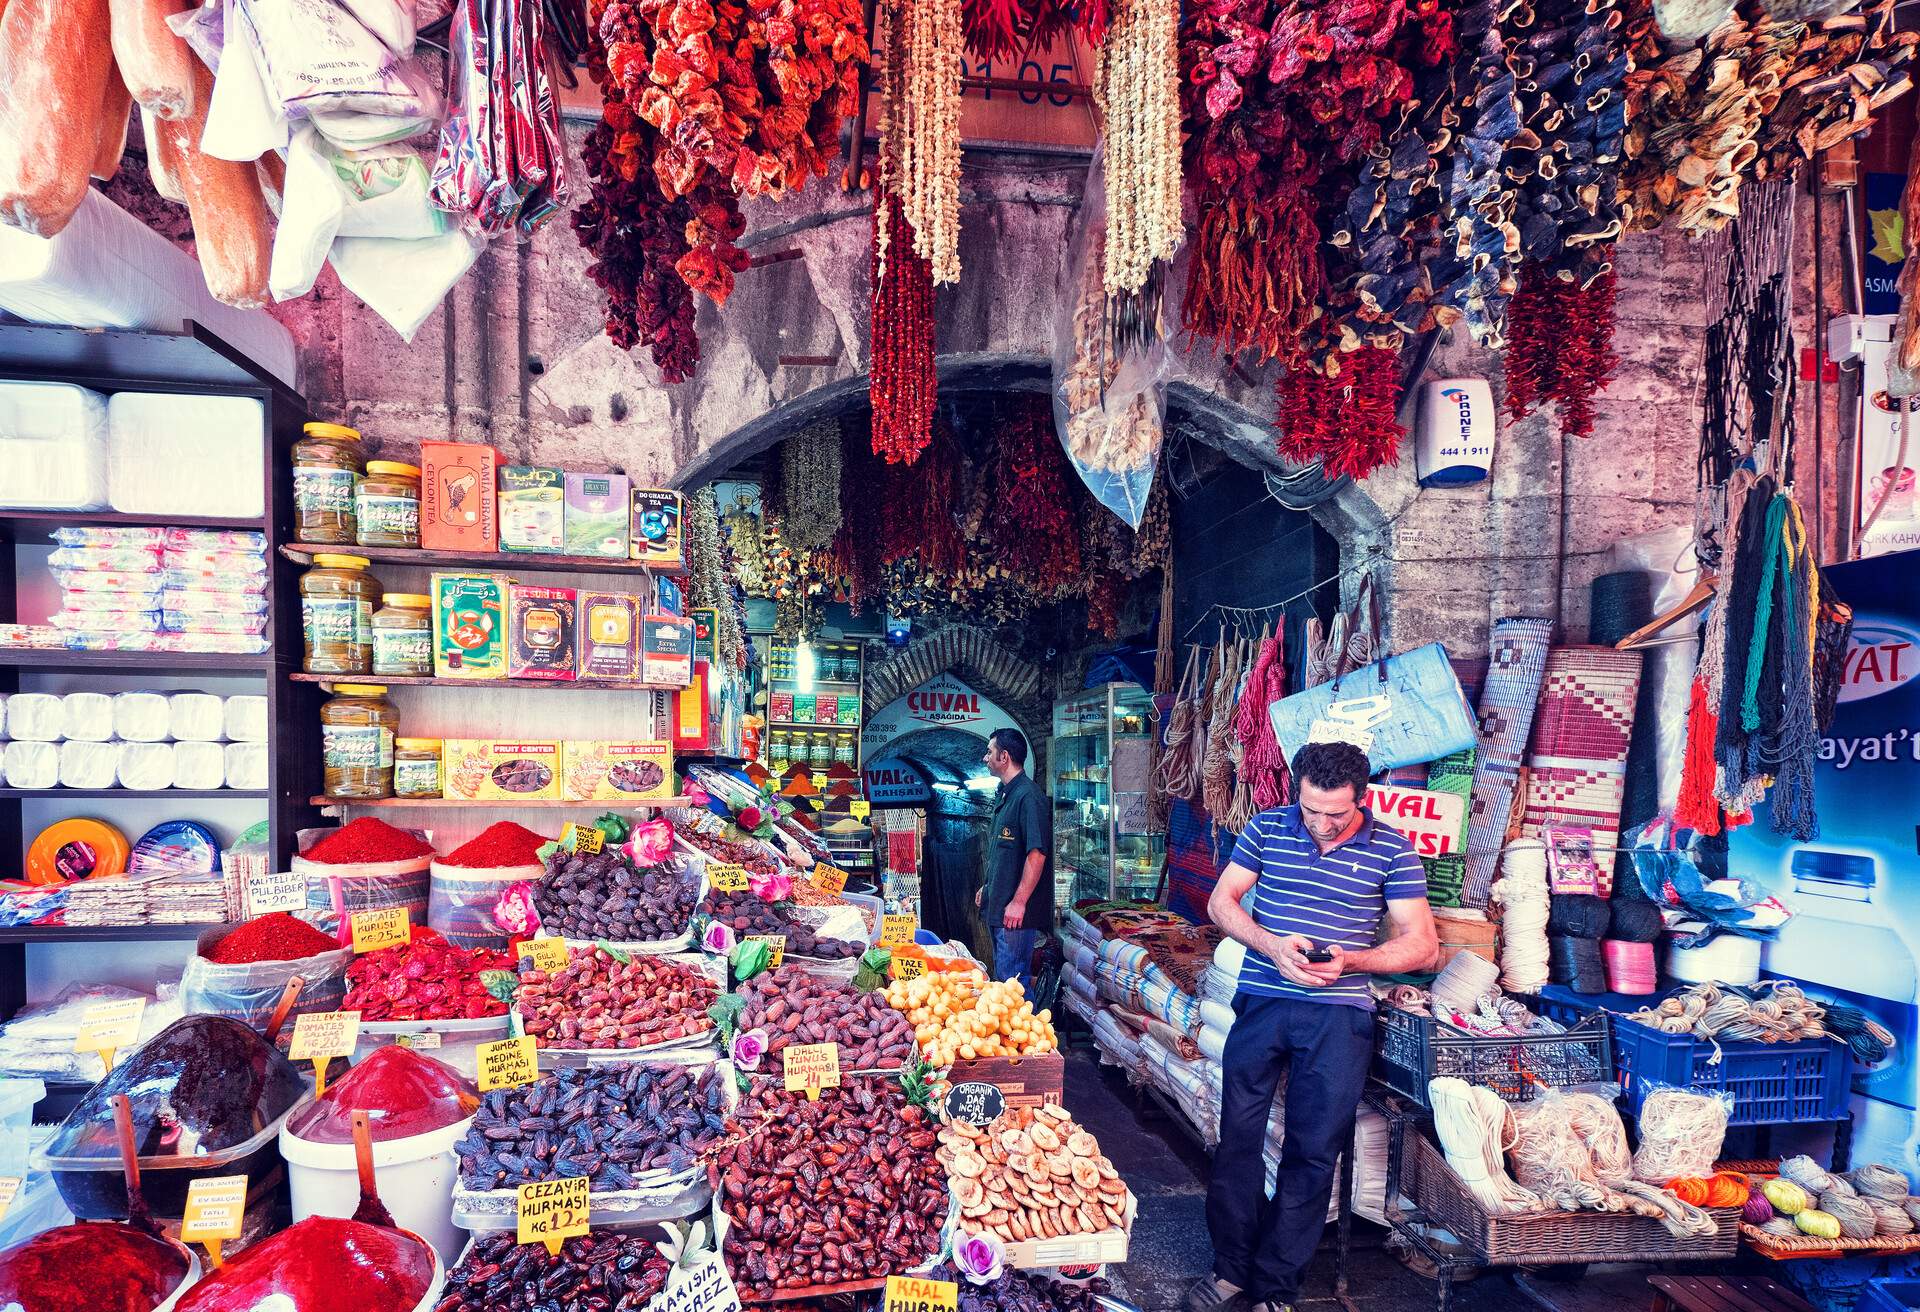 The Spice Bazaar in Istanbul, Turkey is one of the largest bazaars in the city. Located in the Eminönü quarter of the Fatih district, it is the most famous covered shopping complex after the Grand Bazaar.